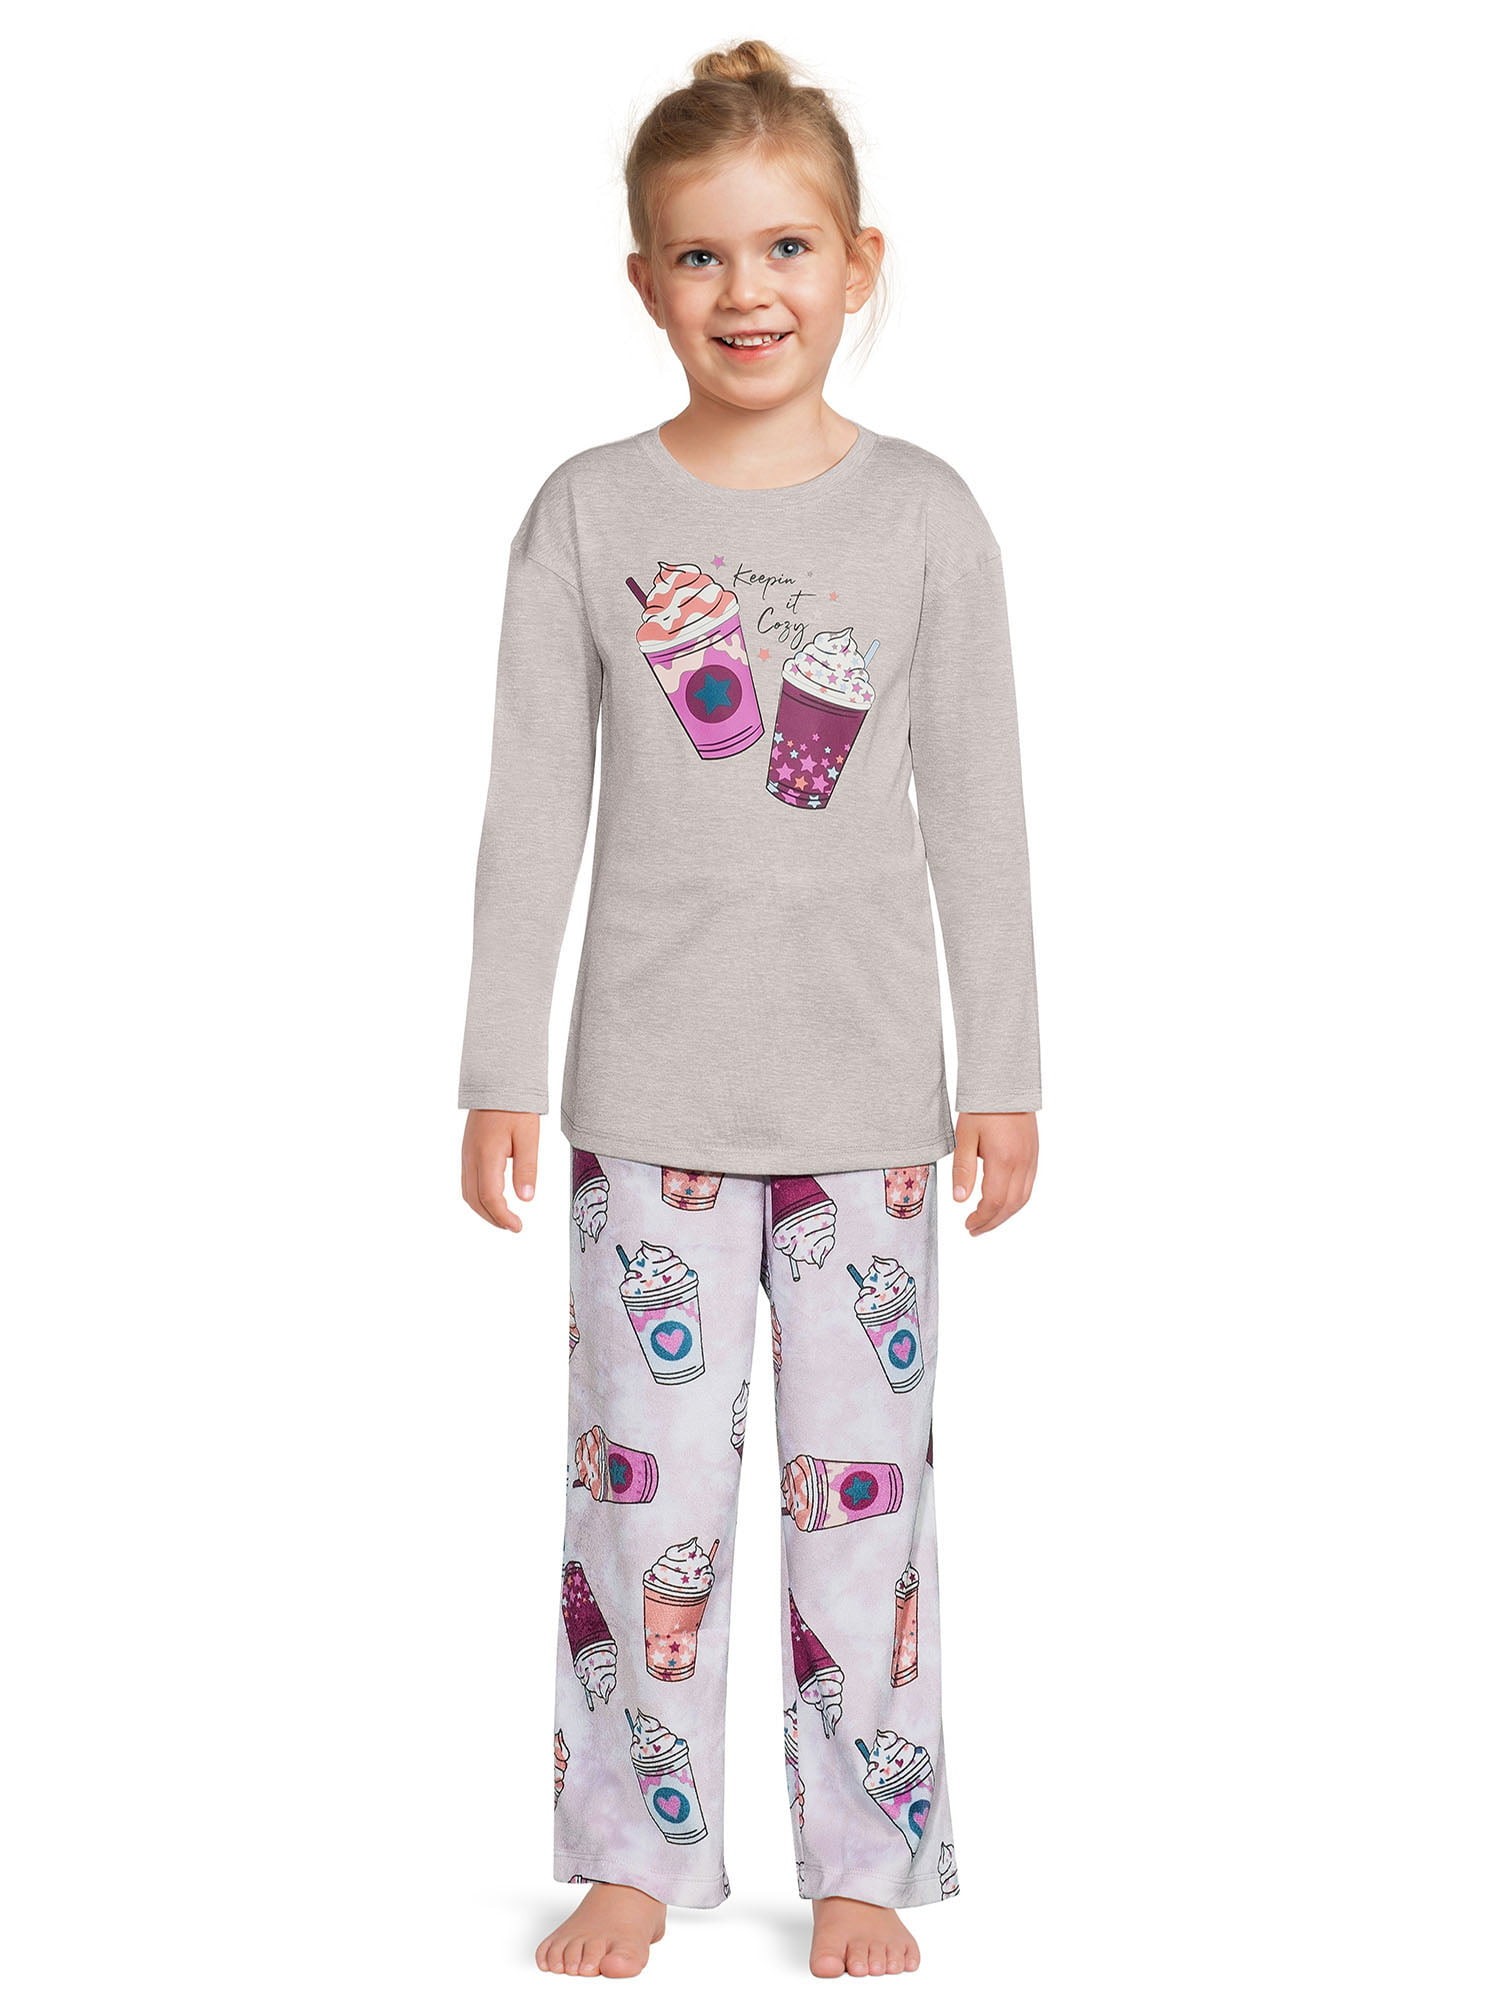 LAVRA Girl’s Cotton Thermal Sets | Fleece Lined Insulated Long John Pajama  & Underwear for Girls | 2 Piece Waffle Knit Thermal Top and Botton Set